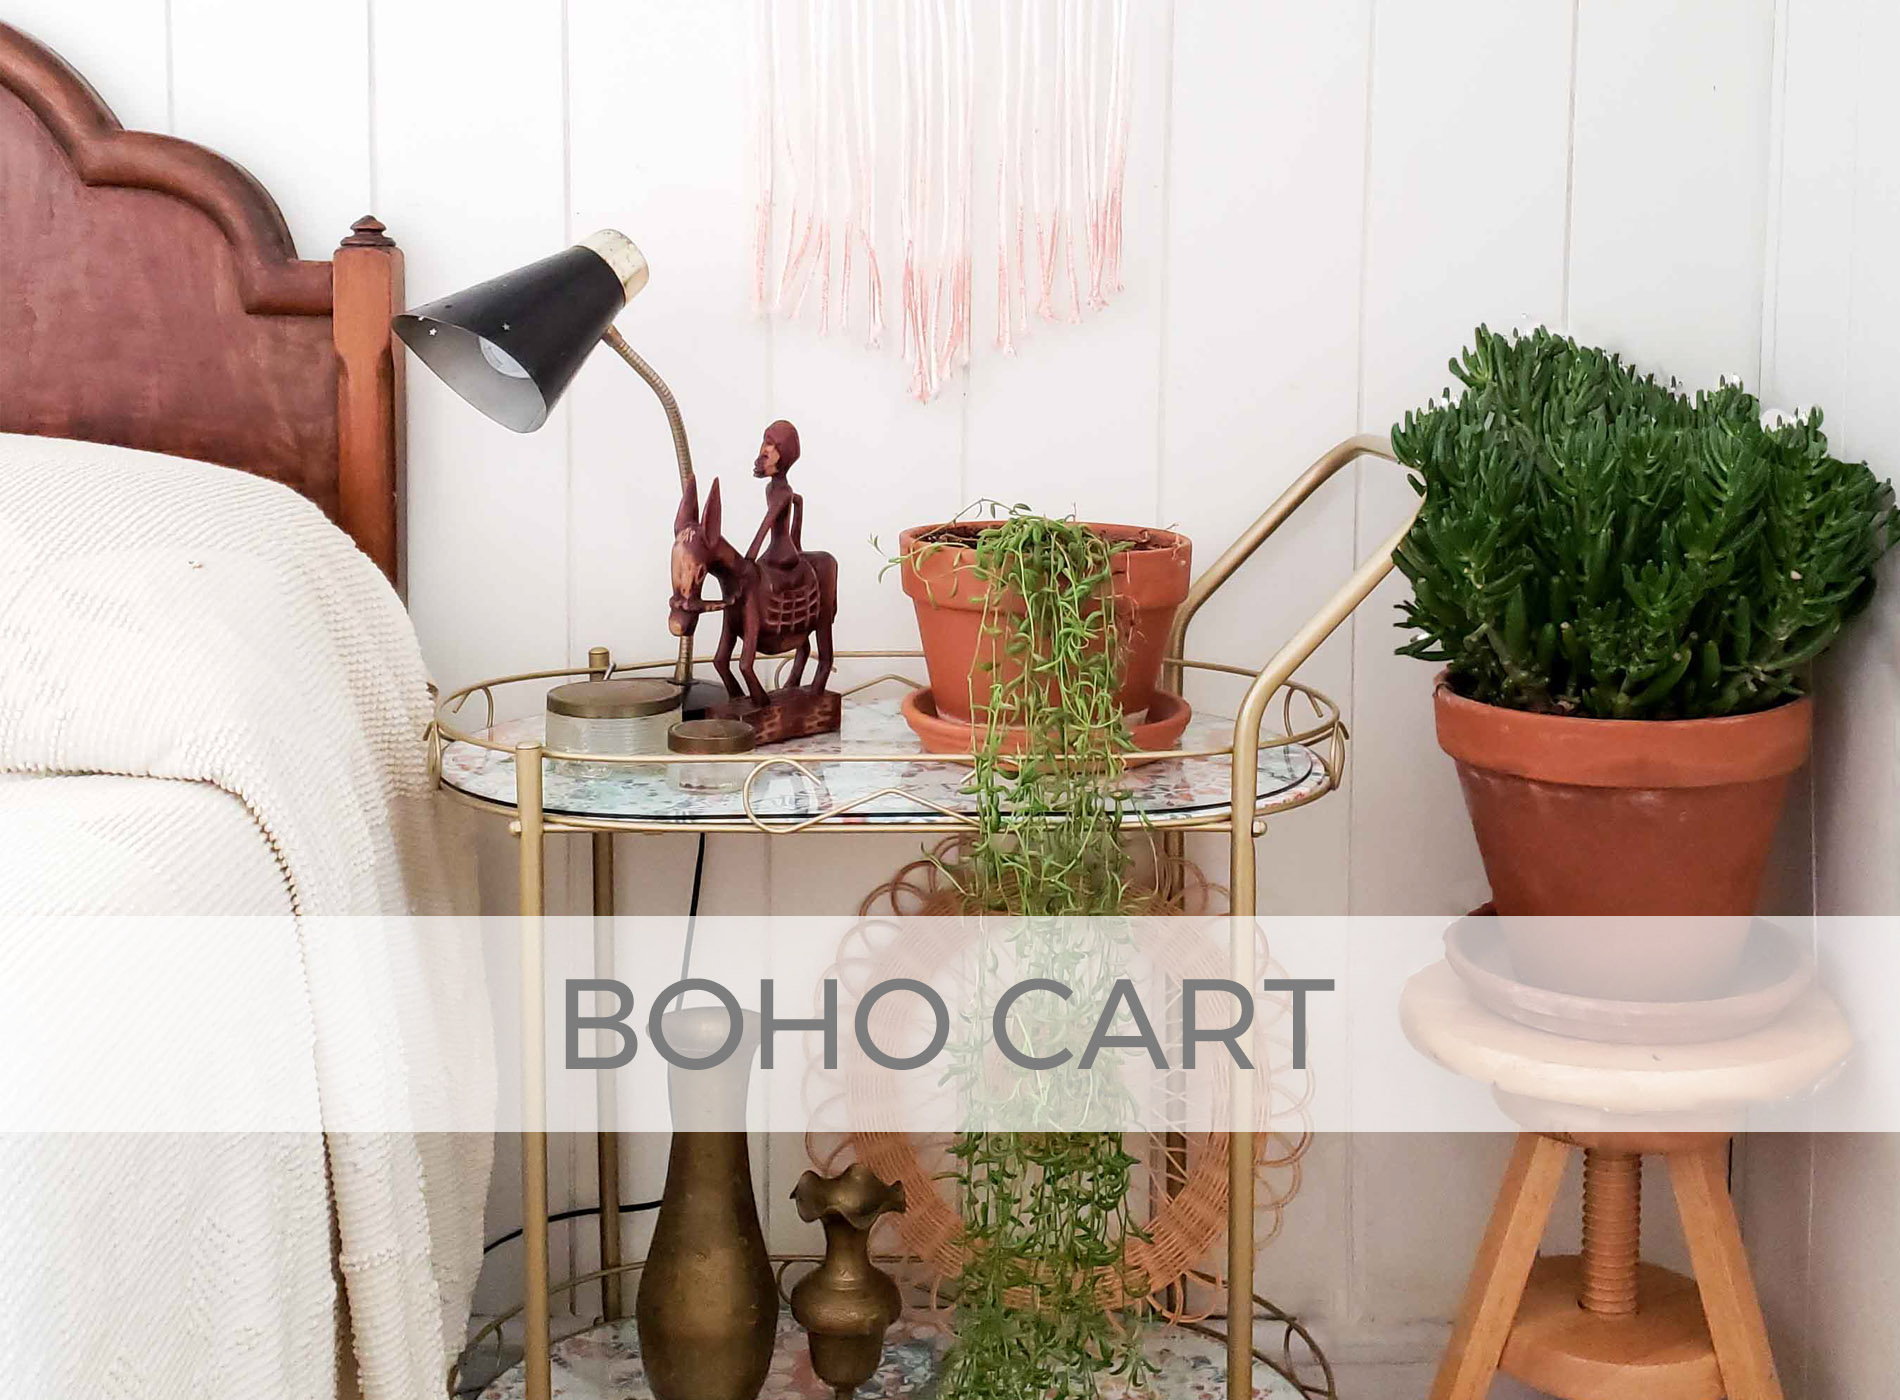 Vintage Cart with Boho Style by Larissa of Prodigal Pieces | prodigalpieces.com